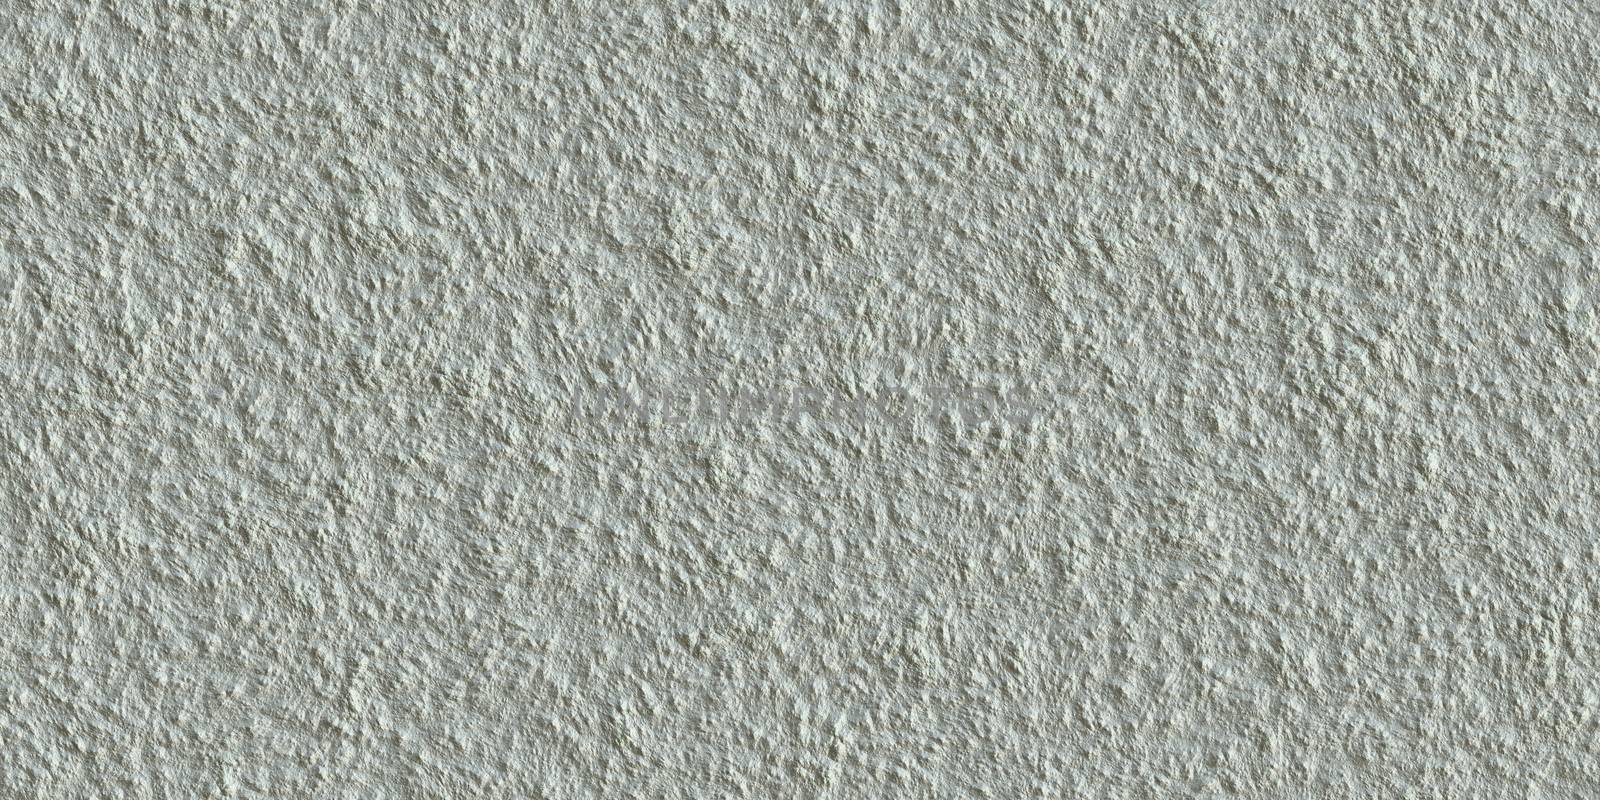 Hard Seamless Spray Plaster Texture. Light Plastering White Wall Background. Decorative Building Exterior Backdrop.